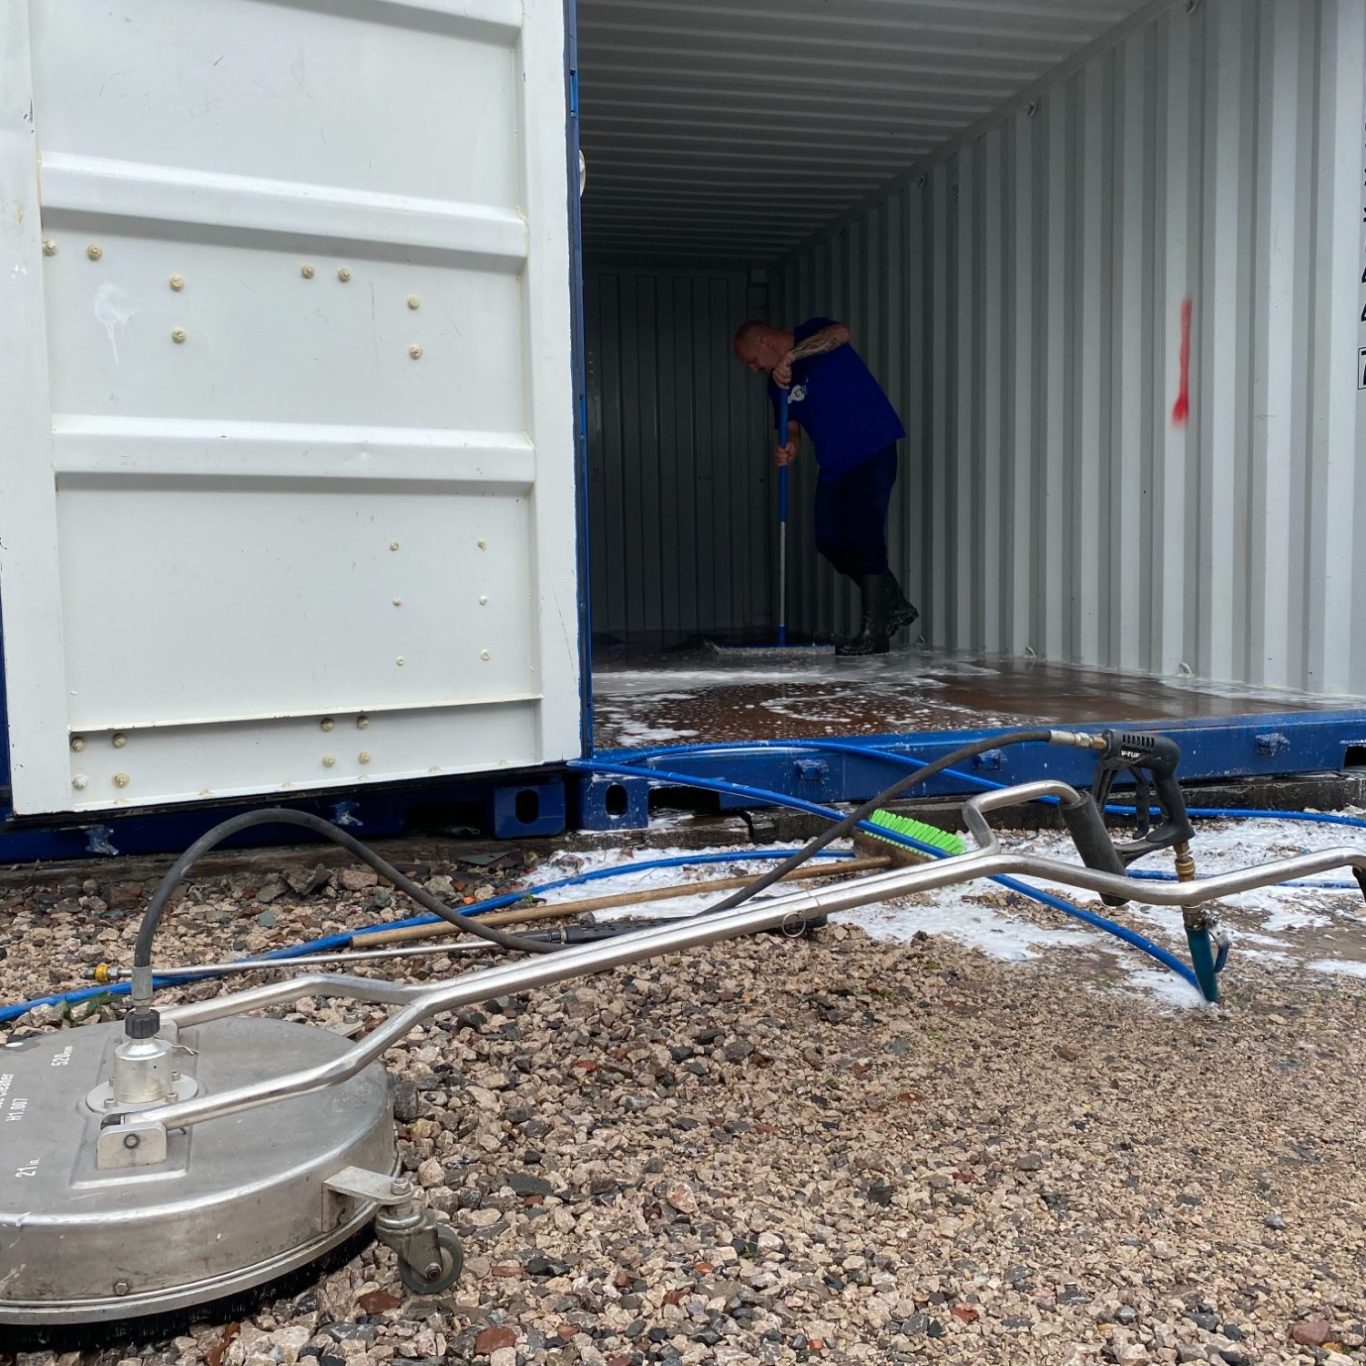 cleaning equipment outside a shipping container